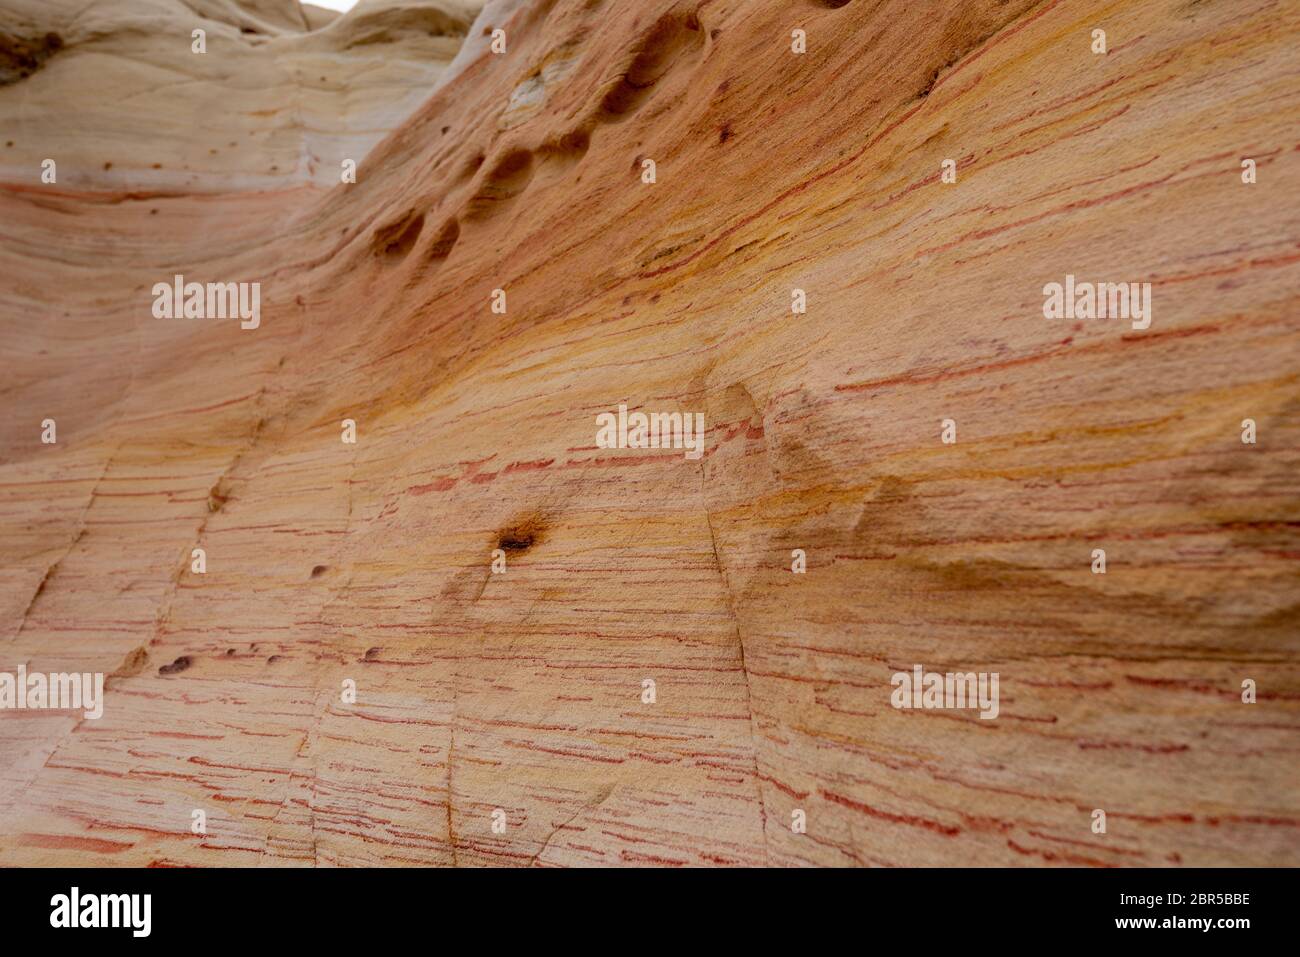 Full frame close up of striped stone Stock Photo